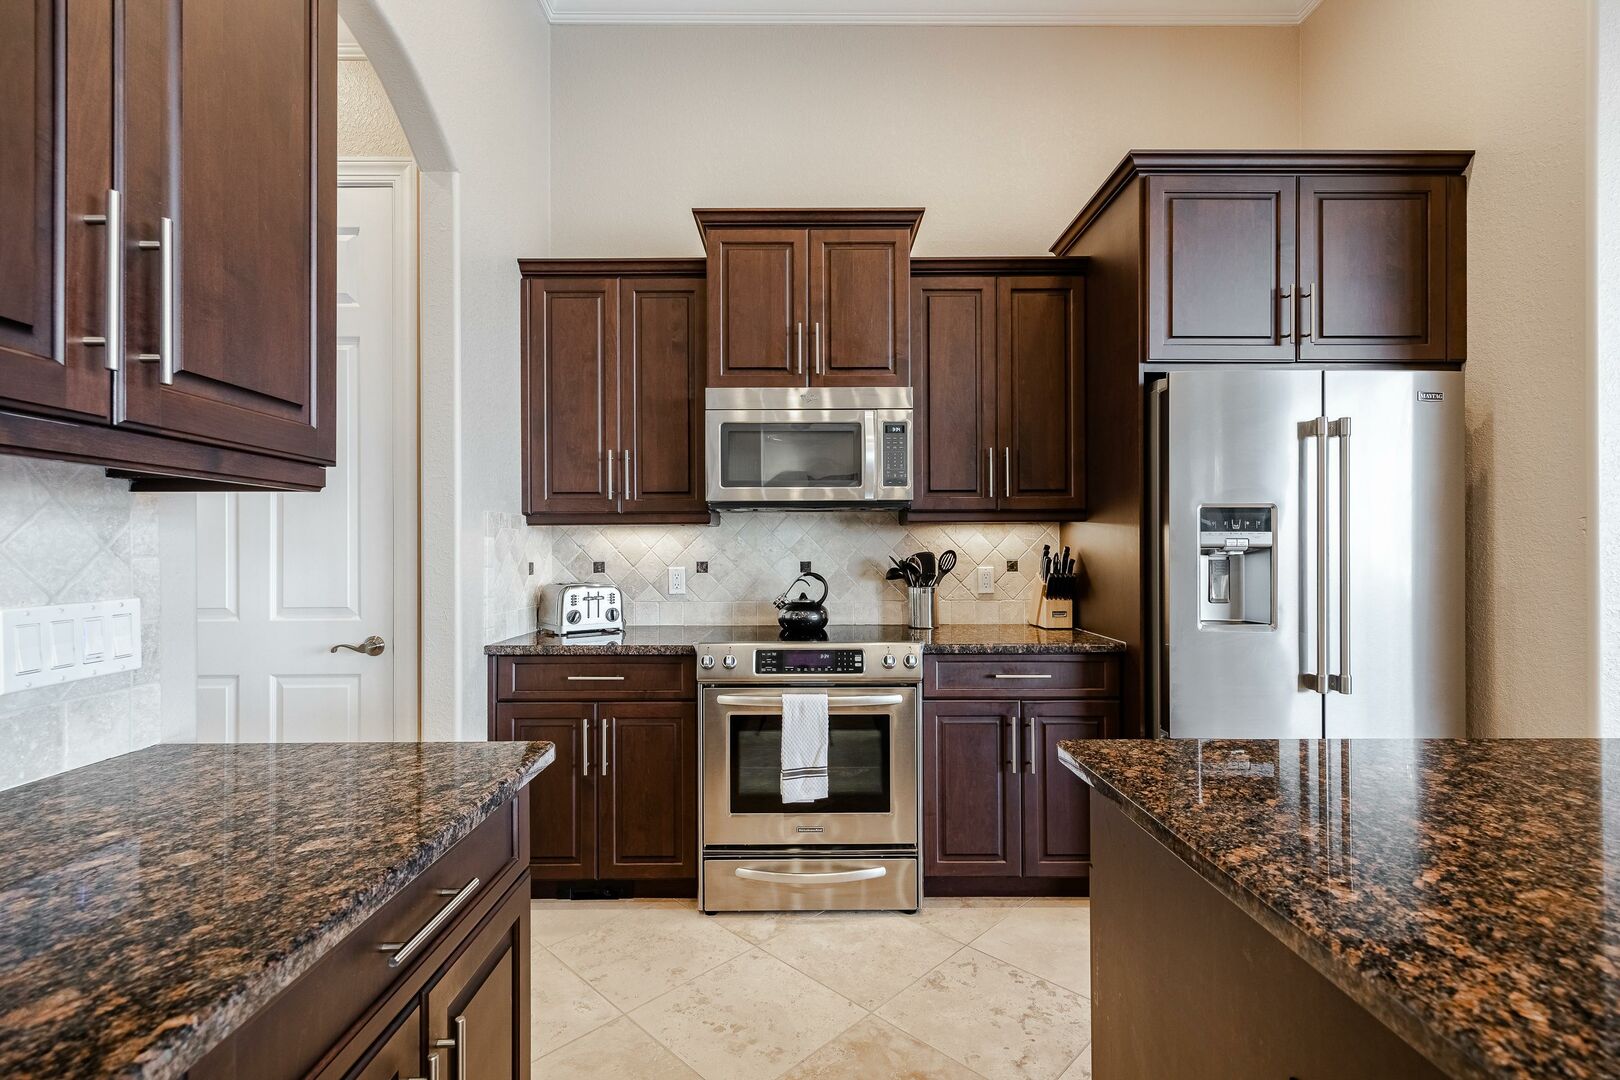 Luxury kitchen in Cape Coral vacation rental